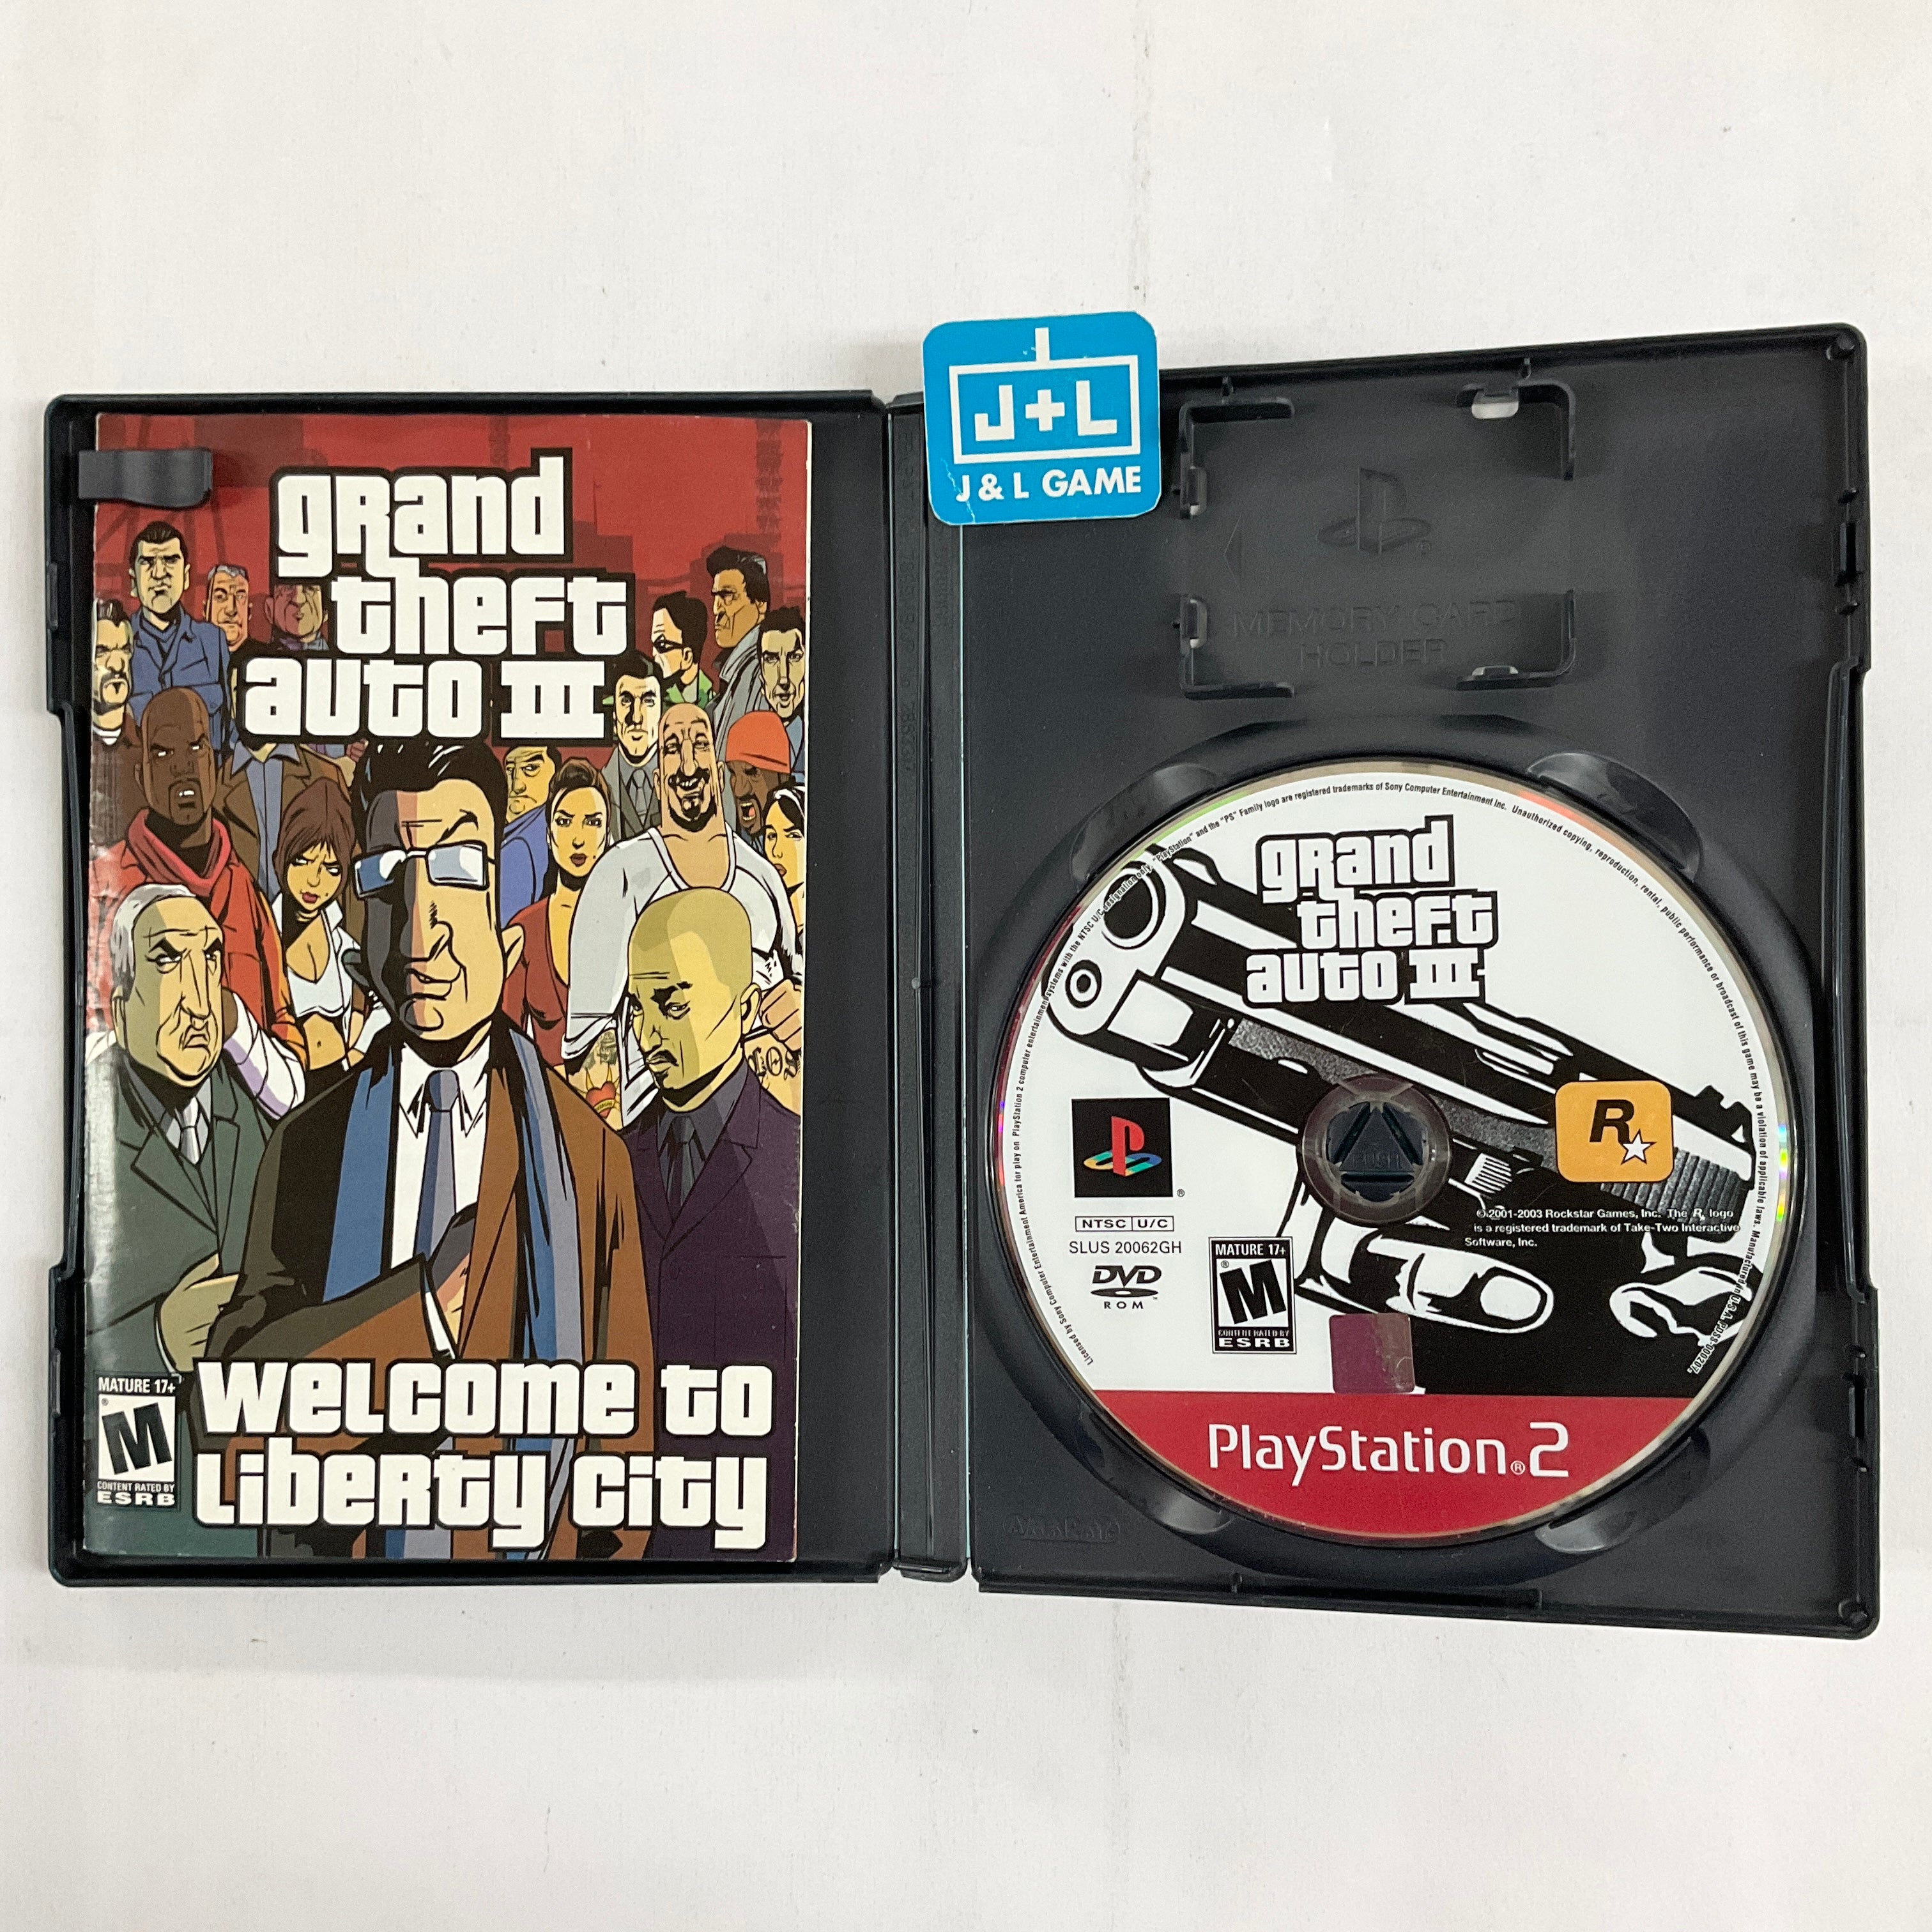 Grand Theft Auto Double Pack (Greatest Hits) - (PS2) PlayStation 2 [Pre-Owned] Video Games Rockstar Games   